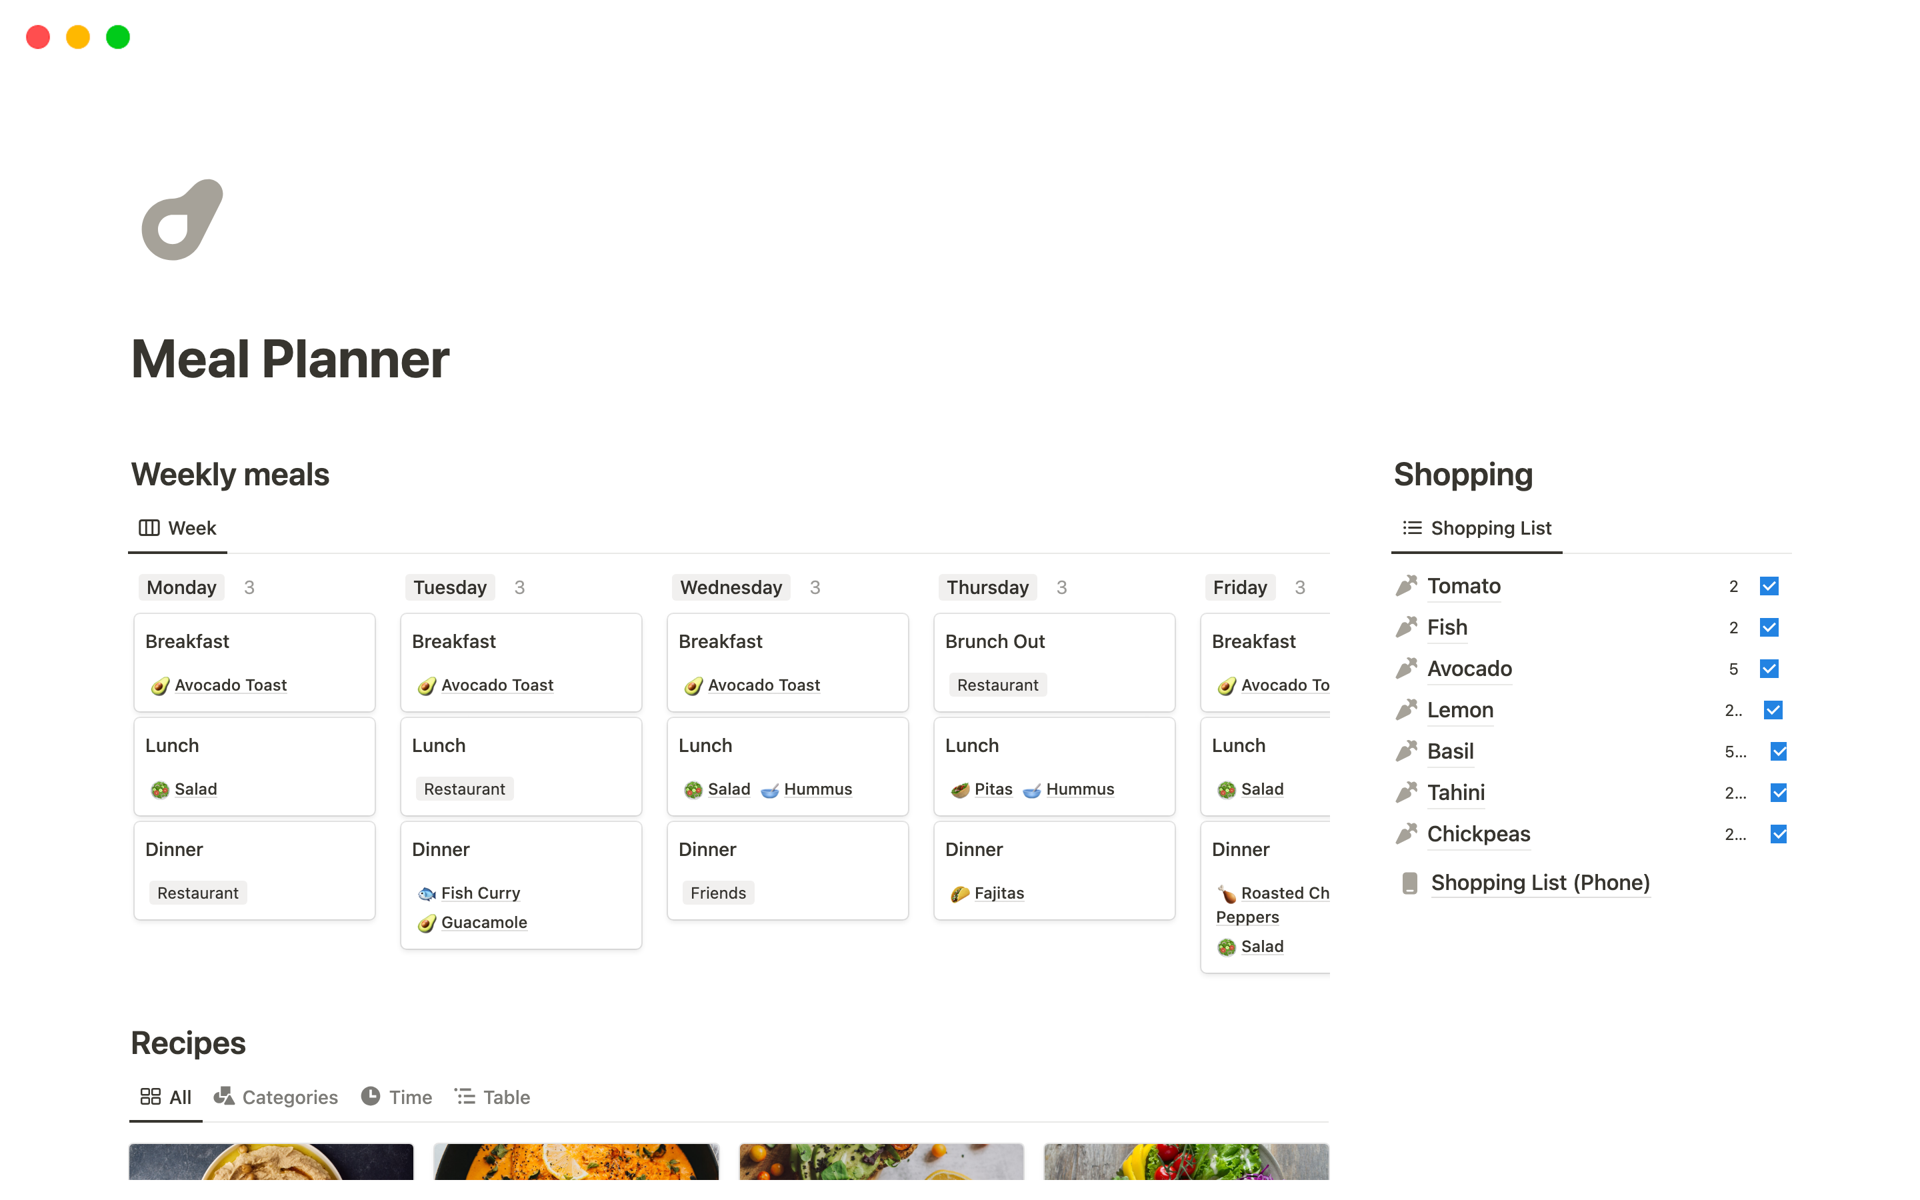 Plan your weekly meals and get your groceries list auto-generated.